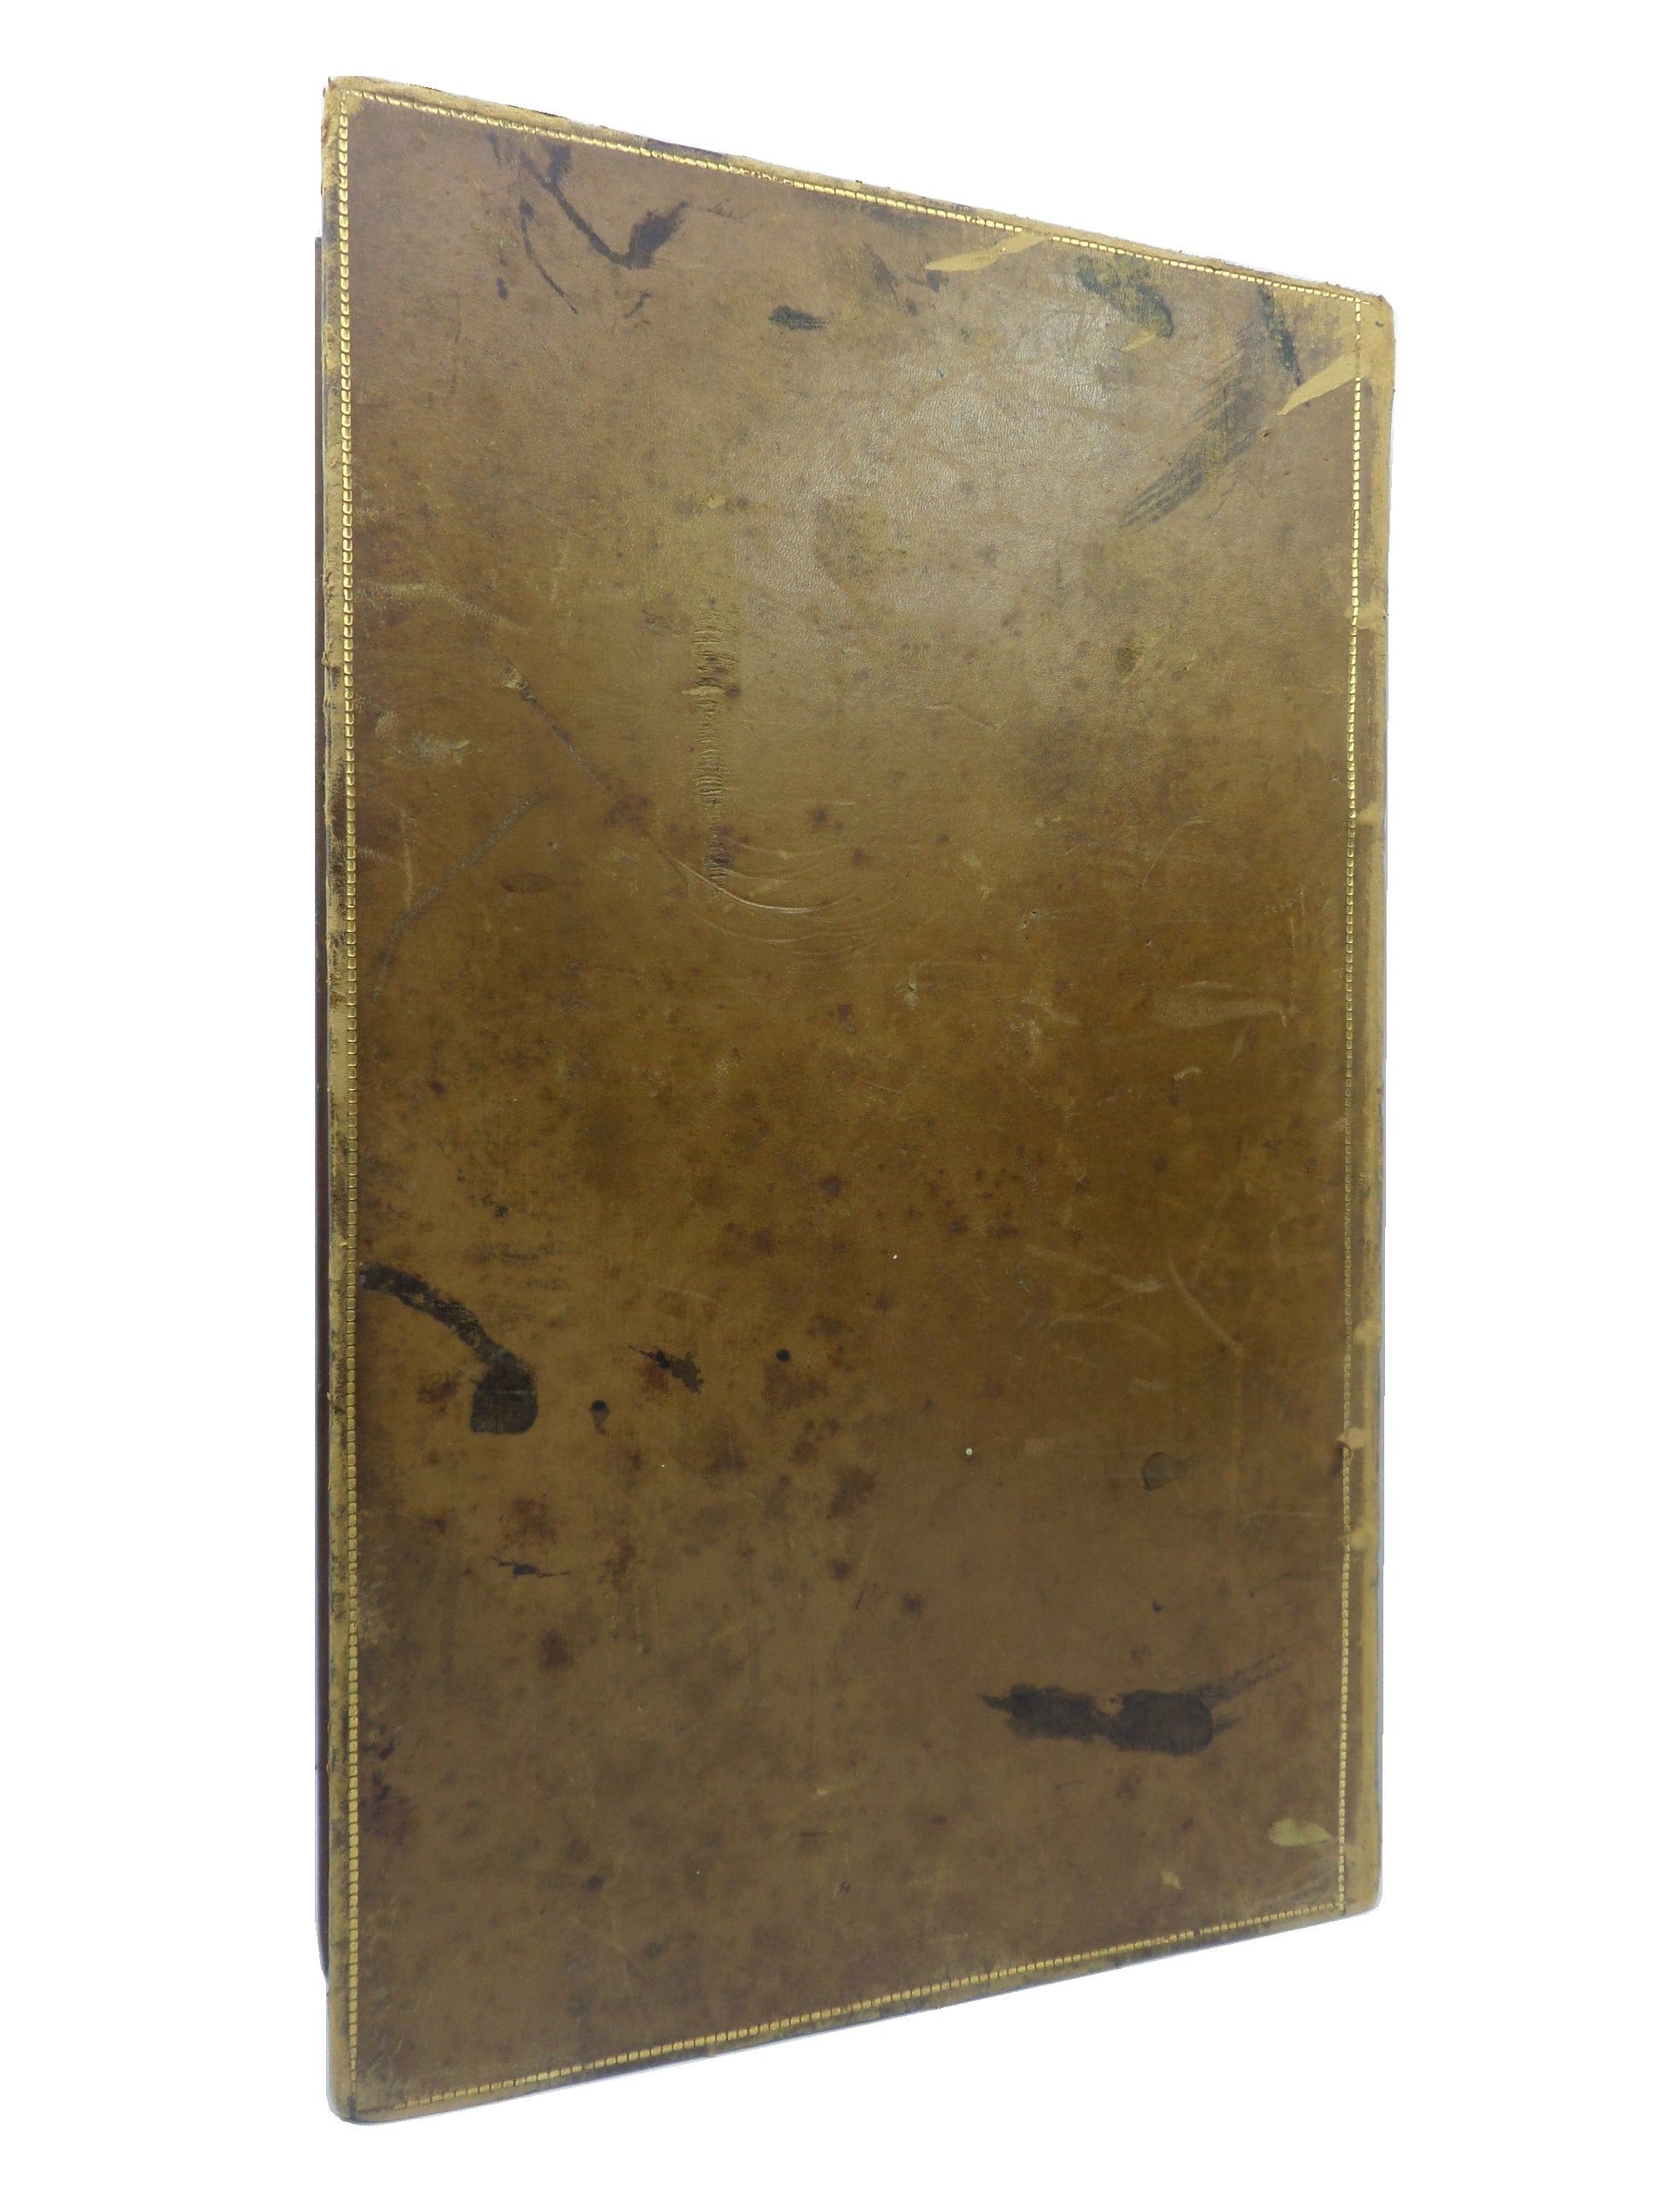 THUCYDIDES IN ENGLISH 1830 FINE LEATHER BINDING